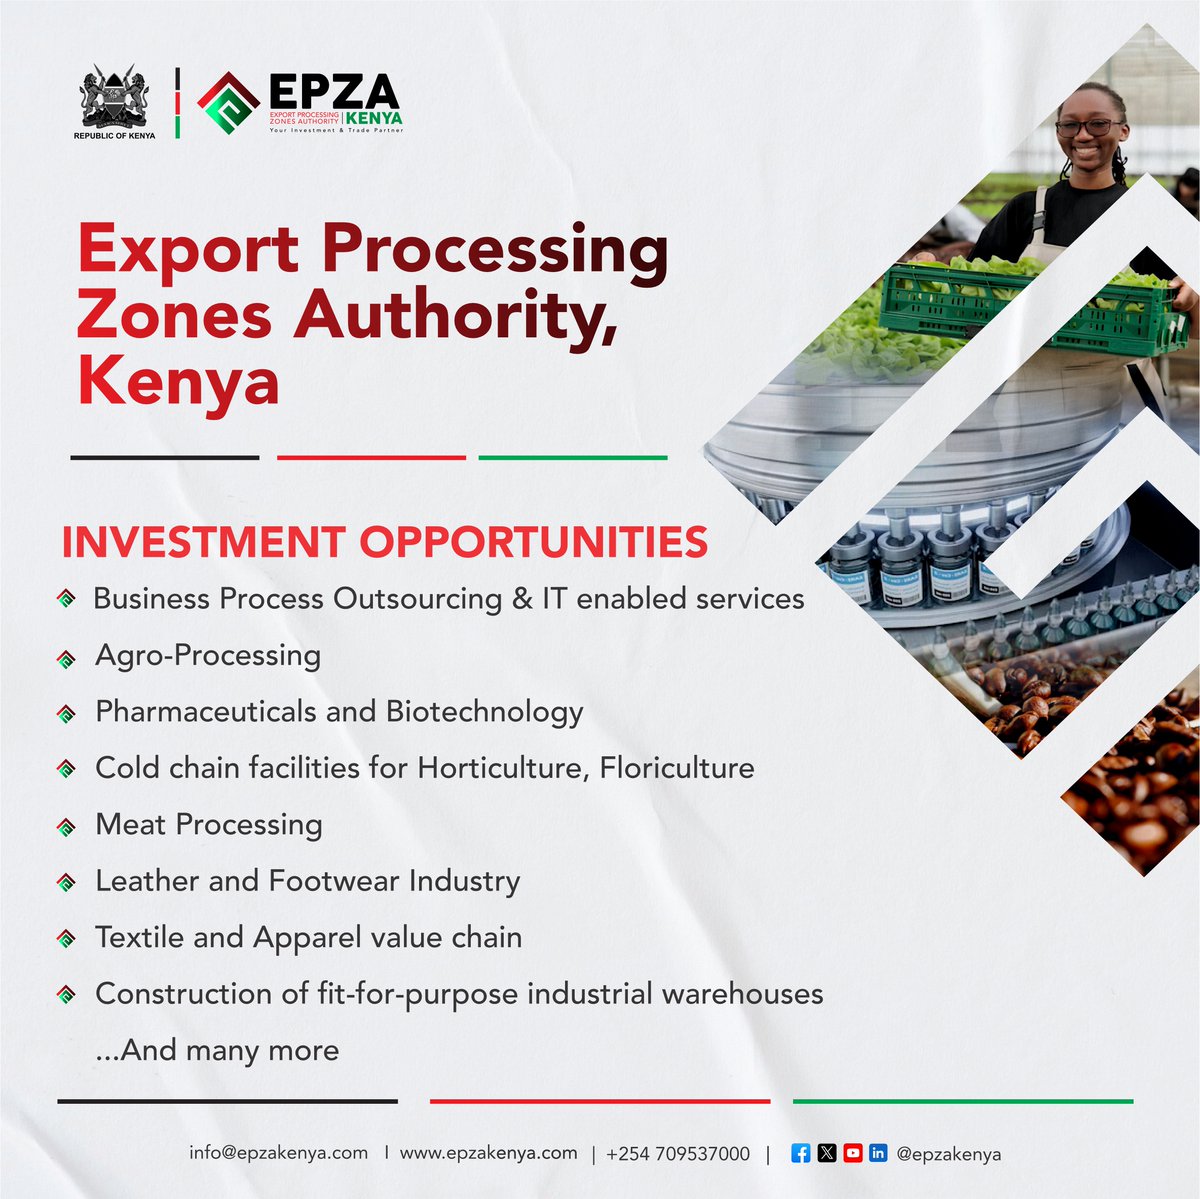 Did you know that there are endless investment opportunities in the EPZ Program? Are you looking into growing and expanding your export oriented business? Contact us. #investments #InvestmentOpportunity #investinkenya #magicalkenya #EPZ